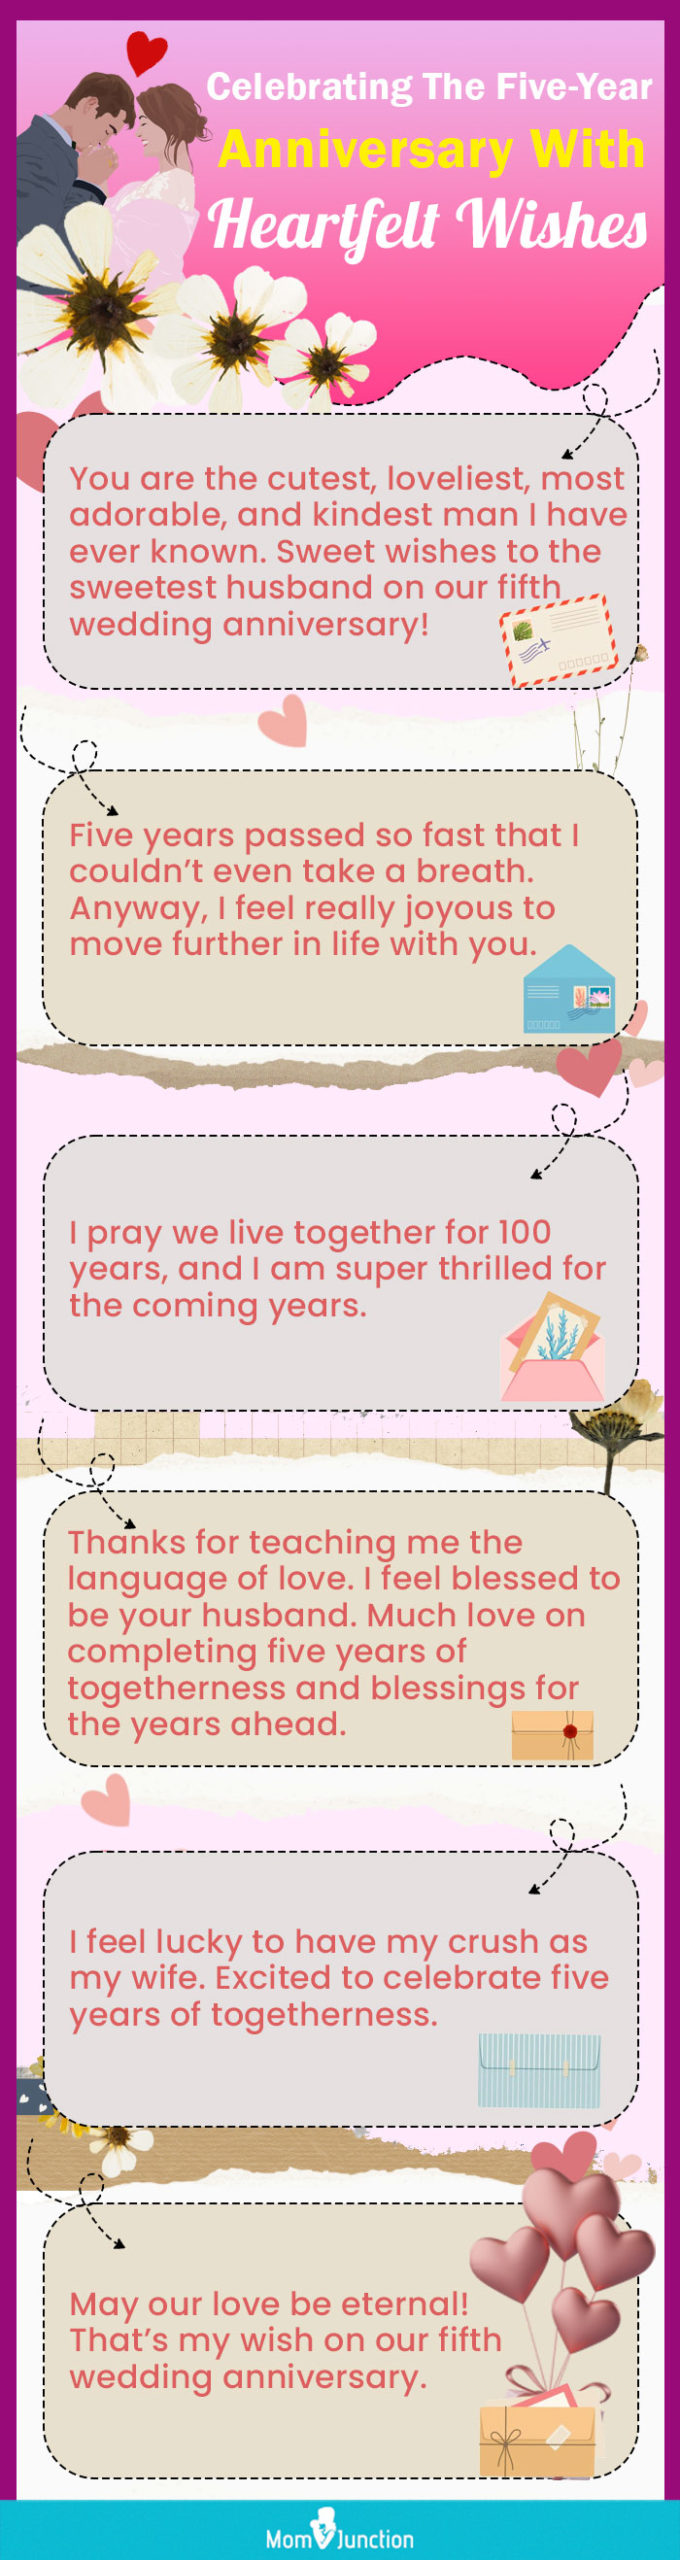 celebrating the five year-Anniversary with heartfelt wishes (infographic)